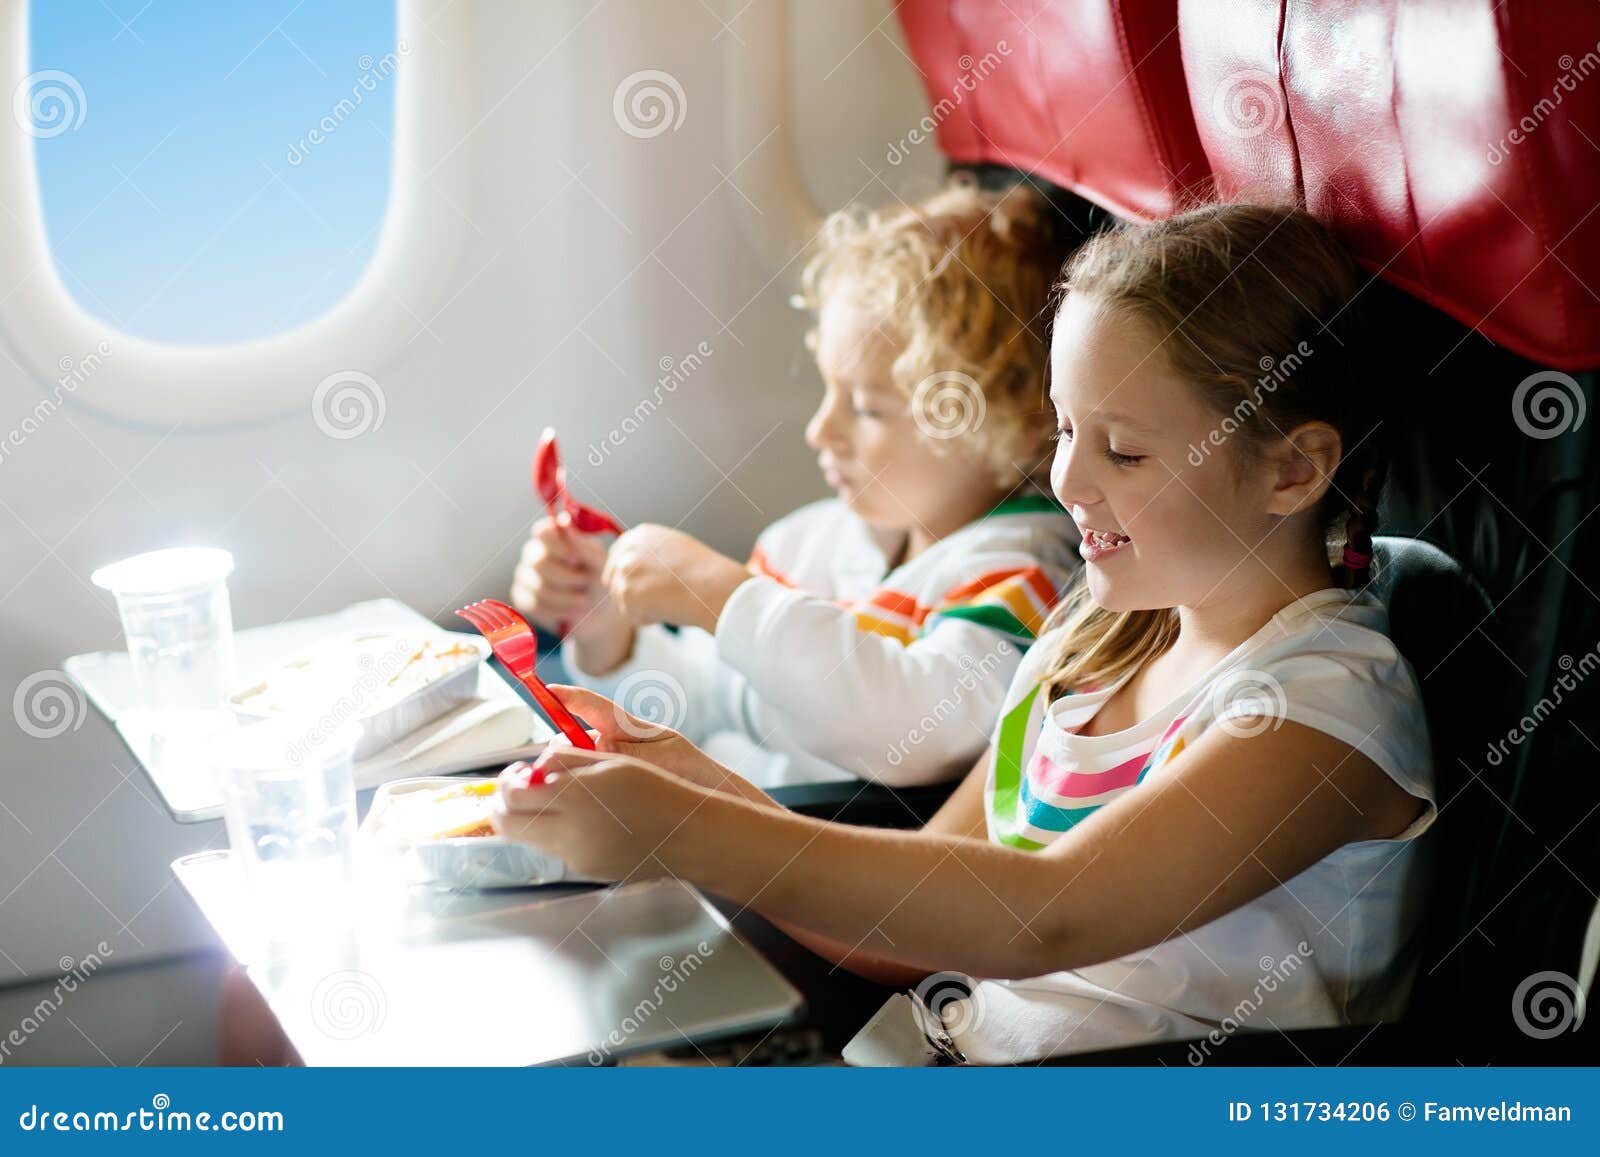 child in airplane window seat. kids flight meal. children fly. special inflight menu, food and drink for baby and kid. girl and